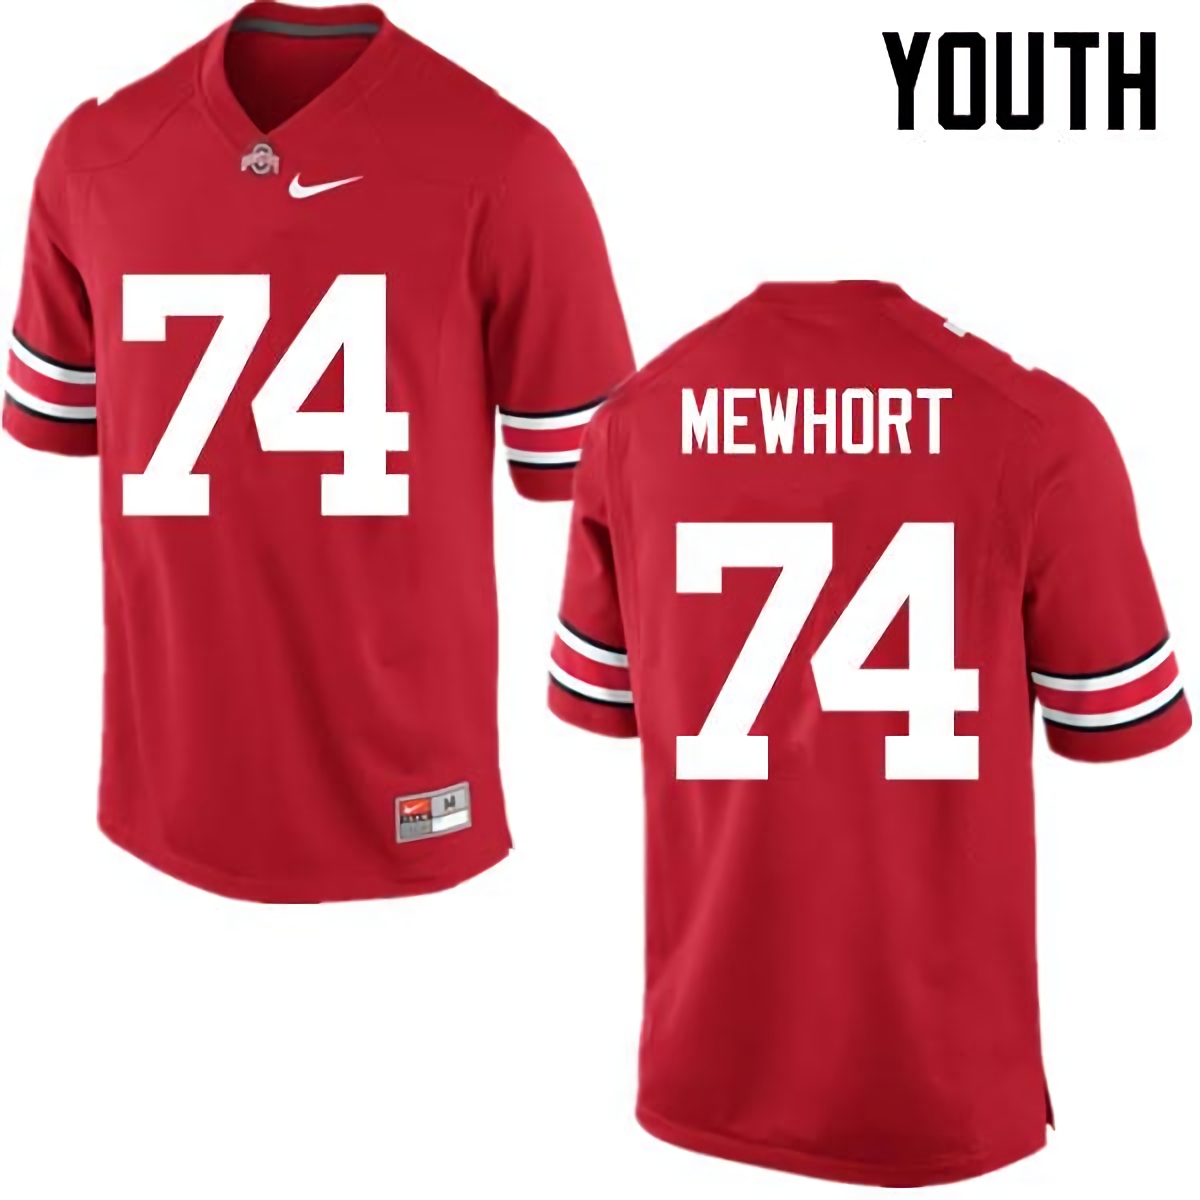 Jack Mewhort Ohio State Buckeyes Youth NCAA #74 Nike Red College Stitched Football Jersey YFG8256OW